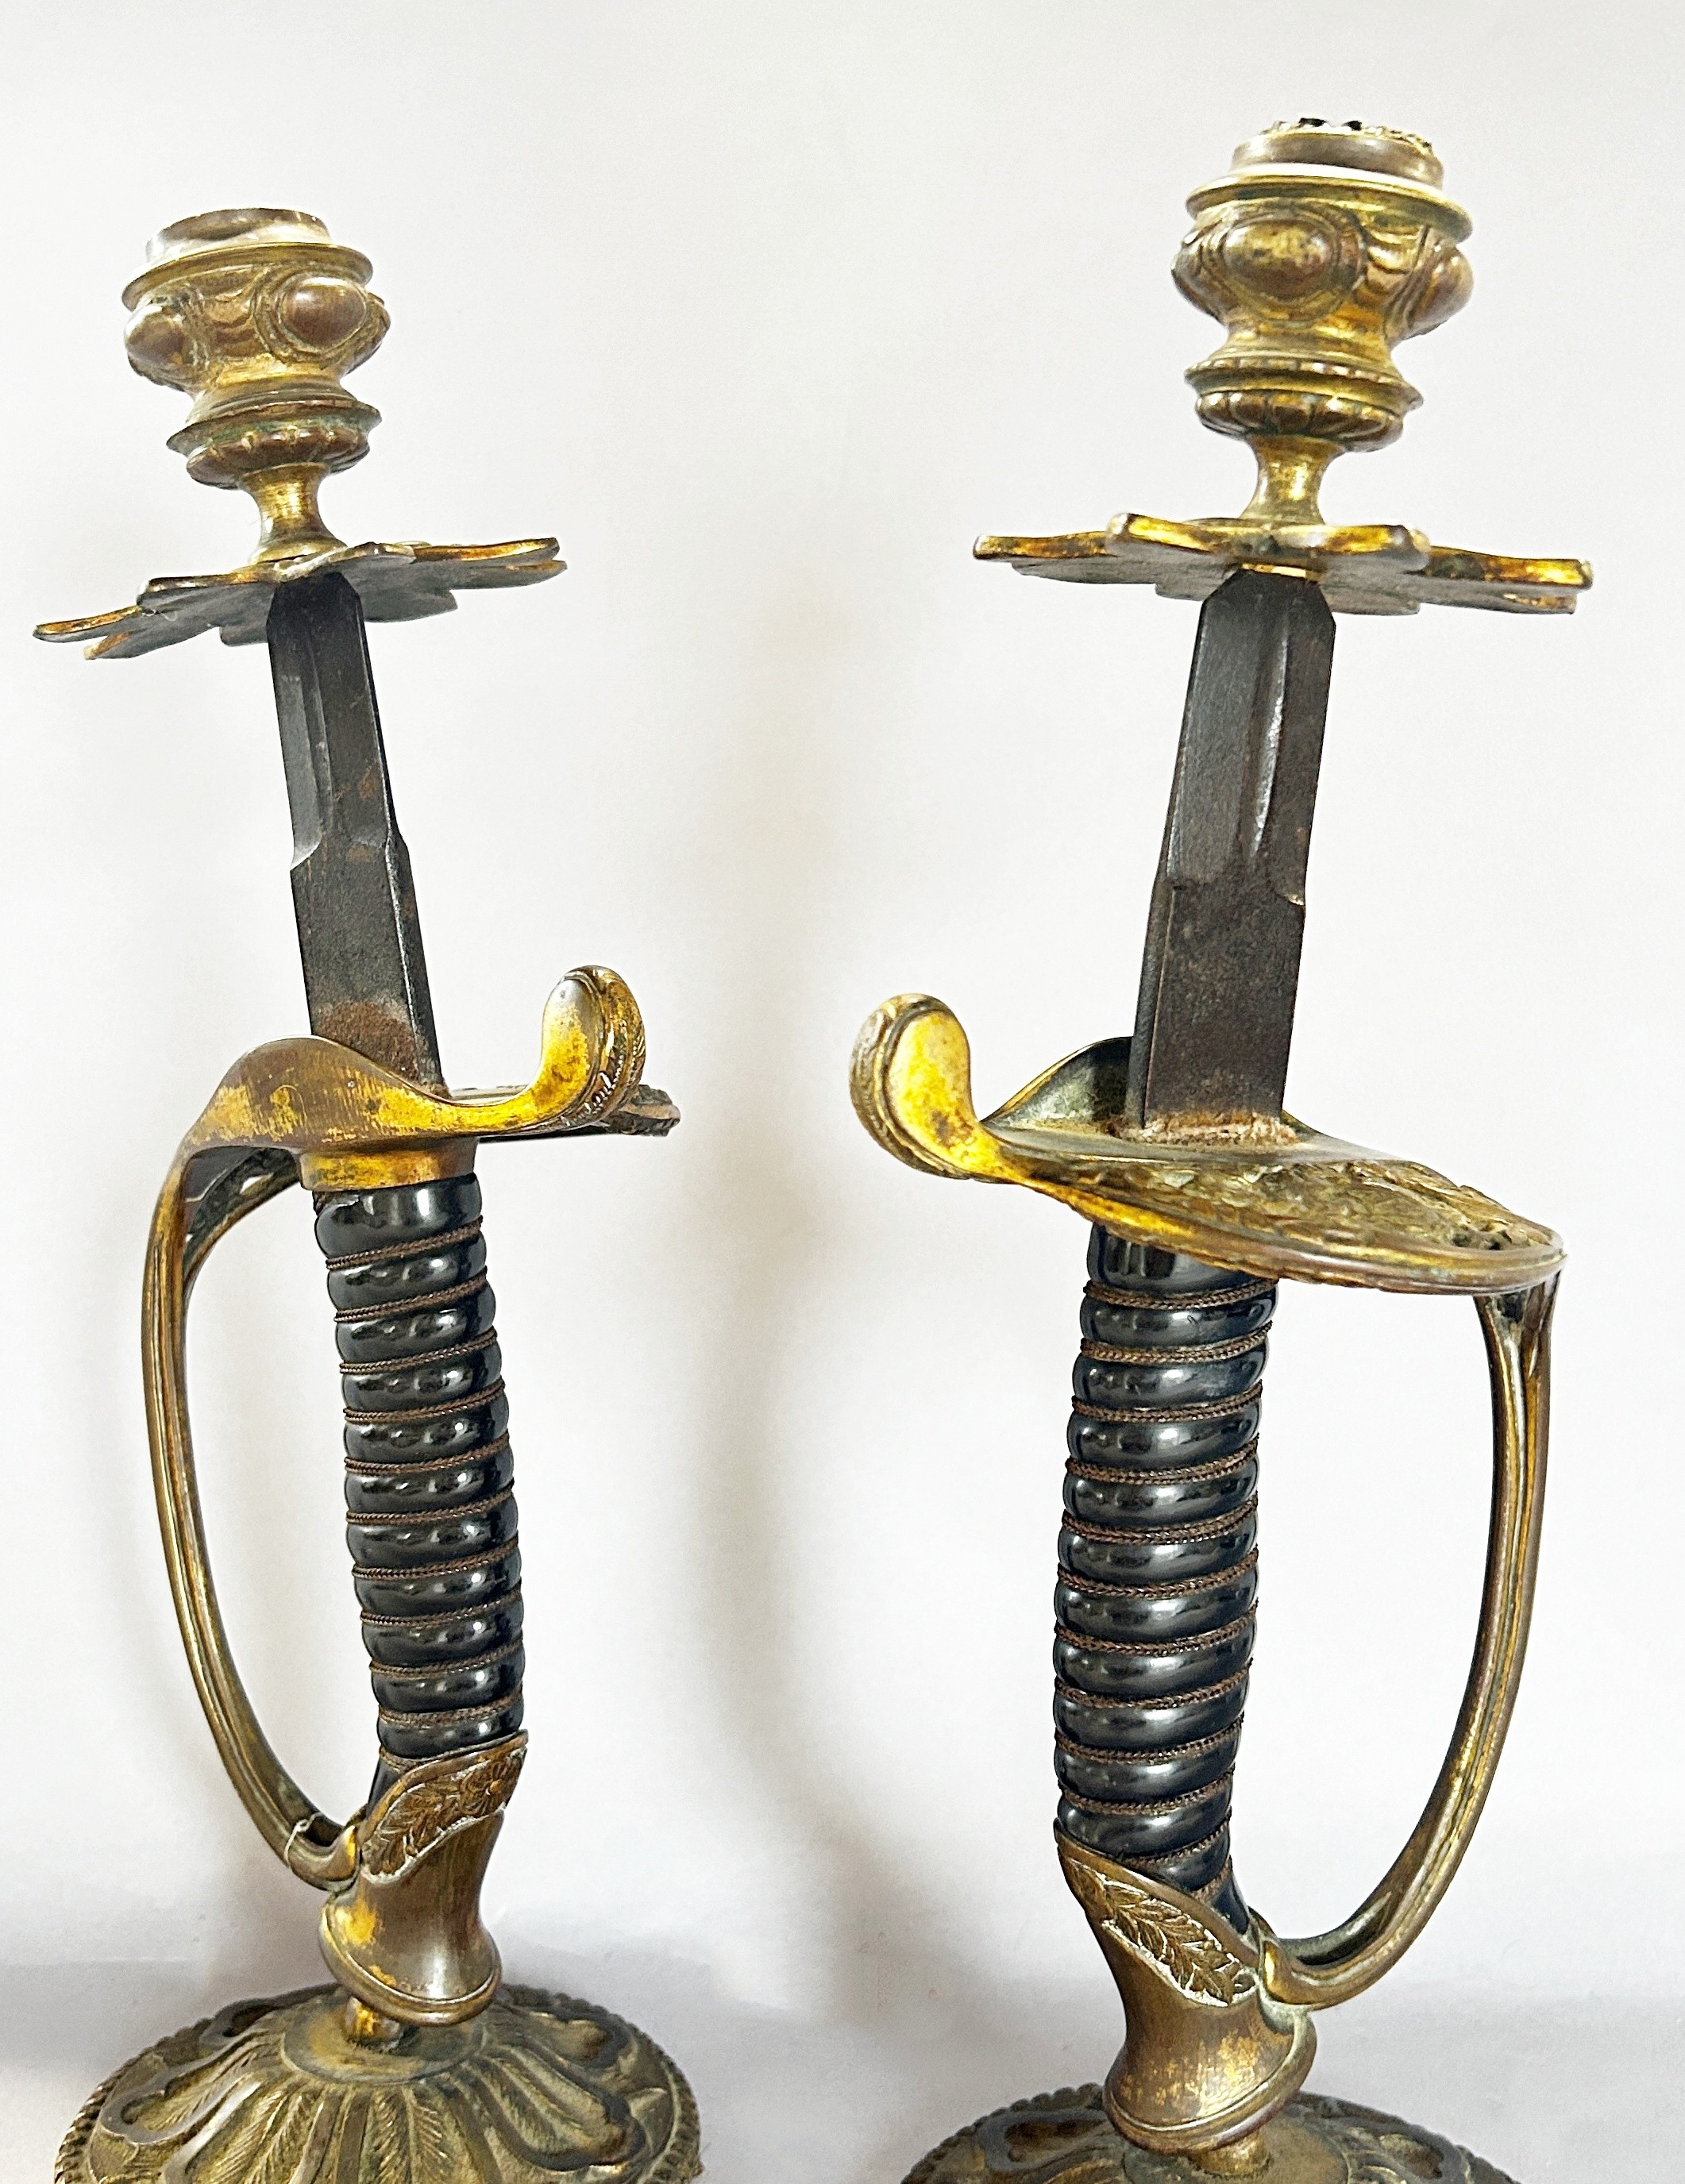 A pair of 19th century sword hilt candlesticks conversions 28cm tall. - Image 5 of 6